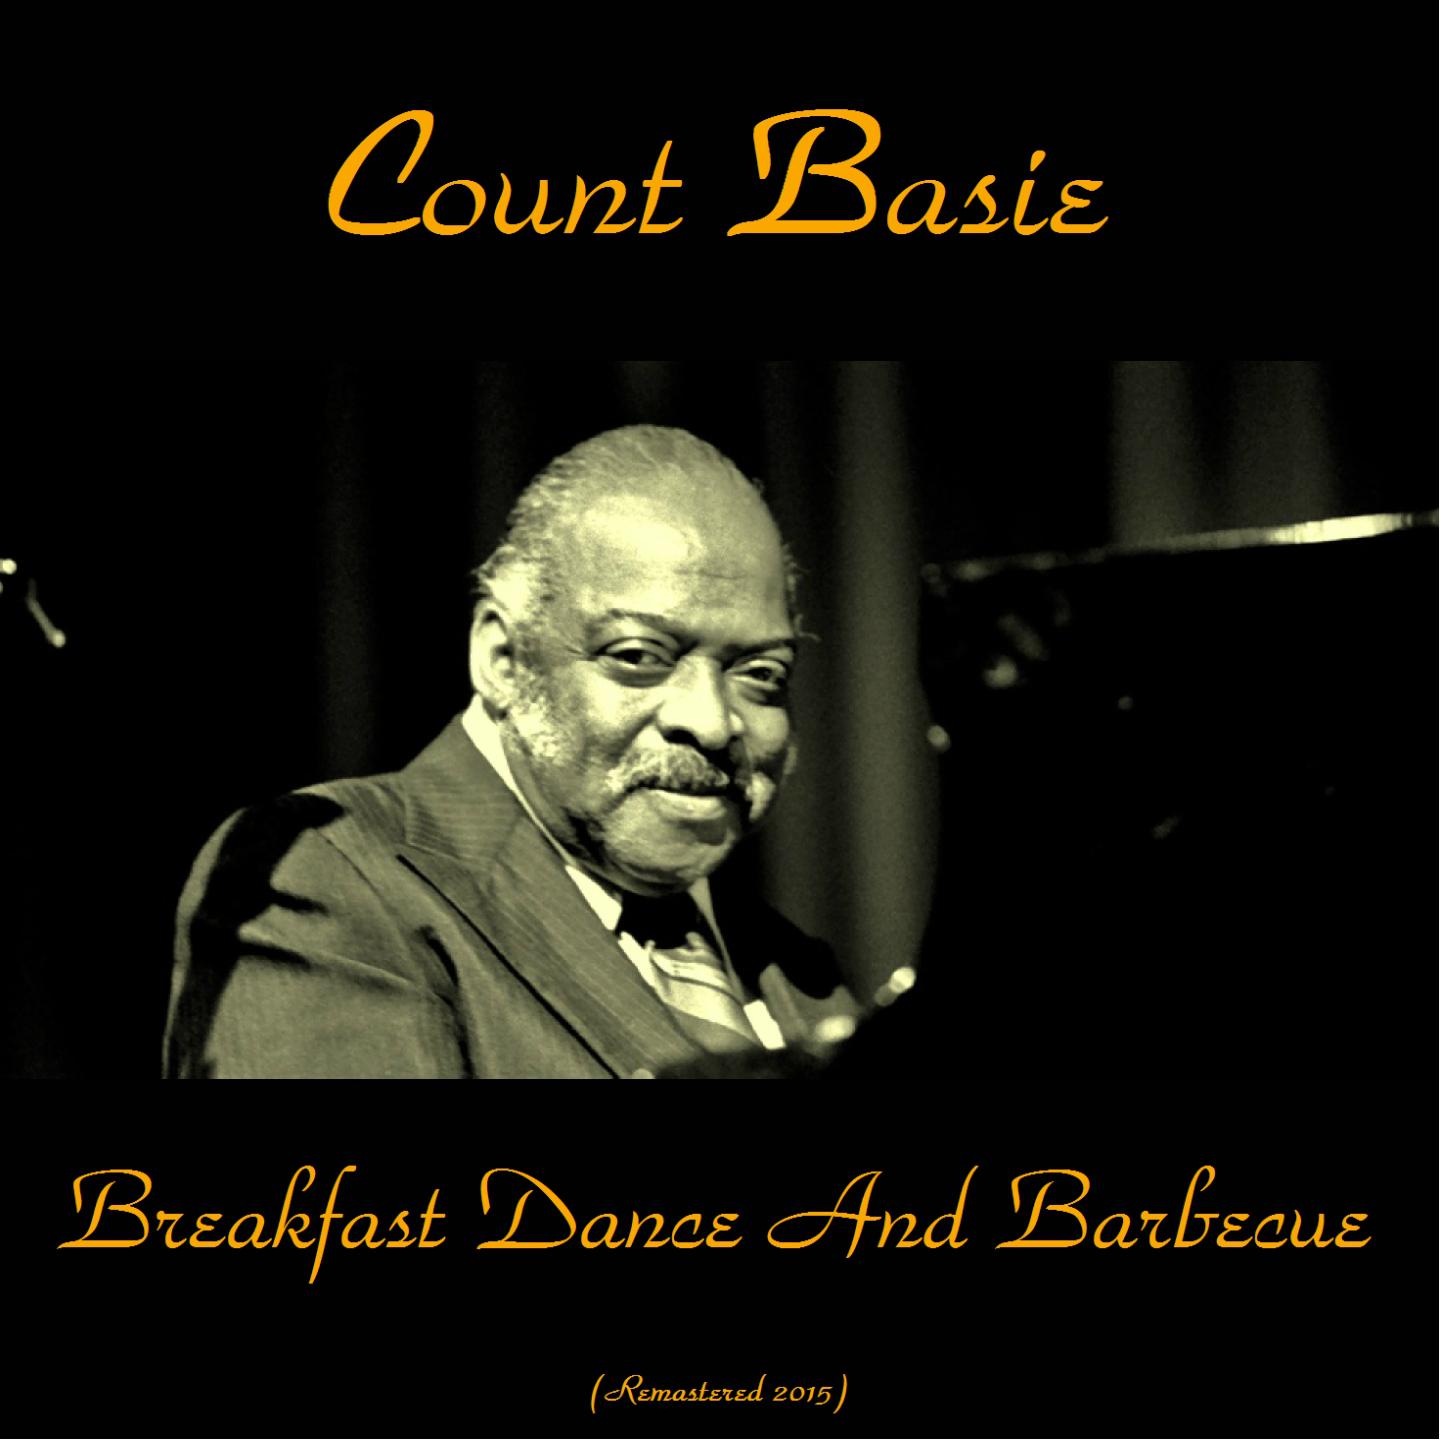 Breakfast Dance and Barbecue (Remastered 2015)